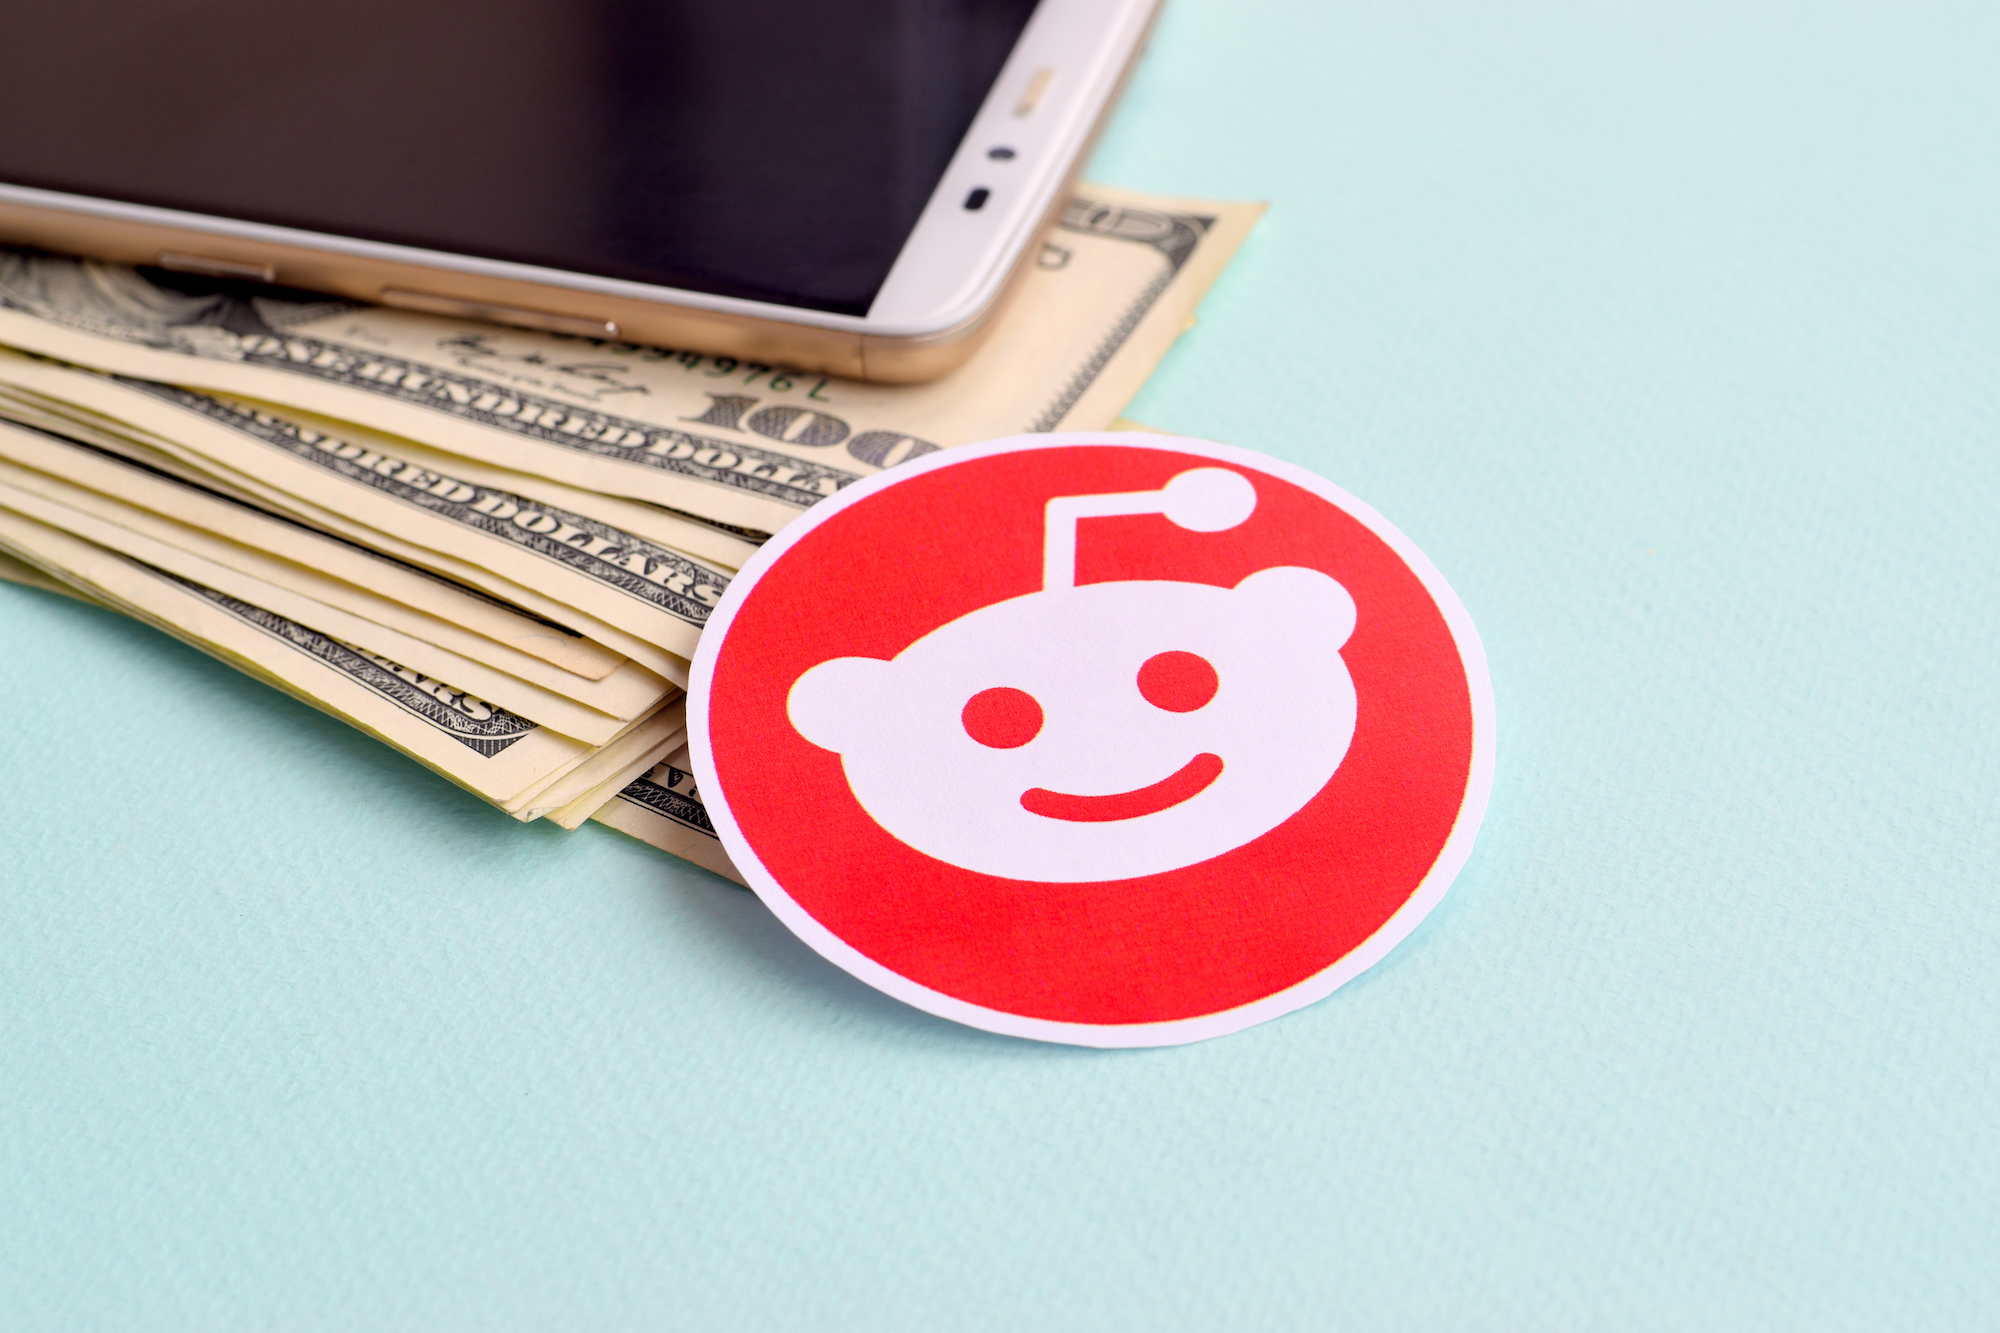 An image of a sticker with the Reddit logo sitting atop a pile of cash is shown.